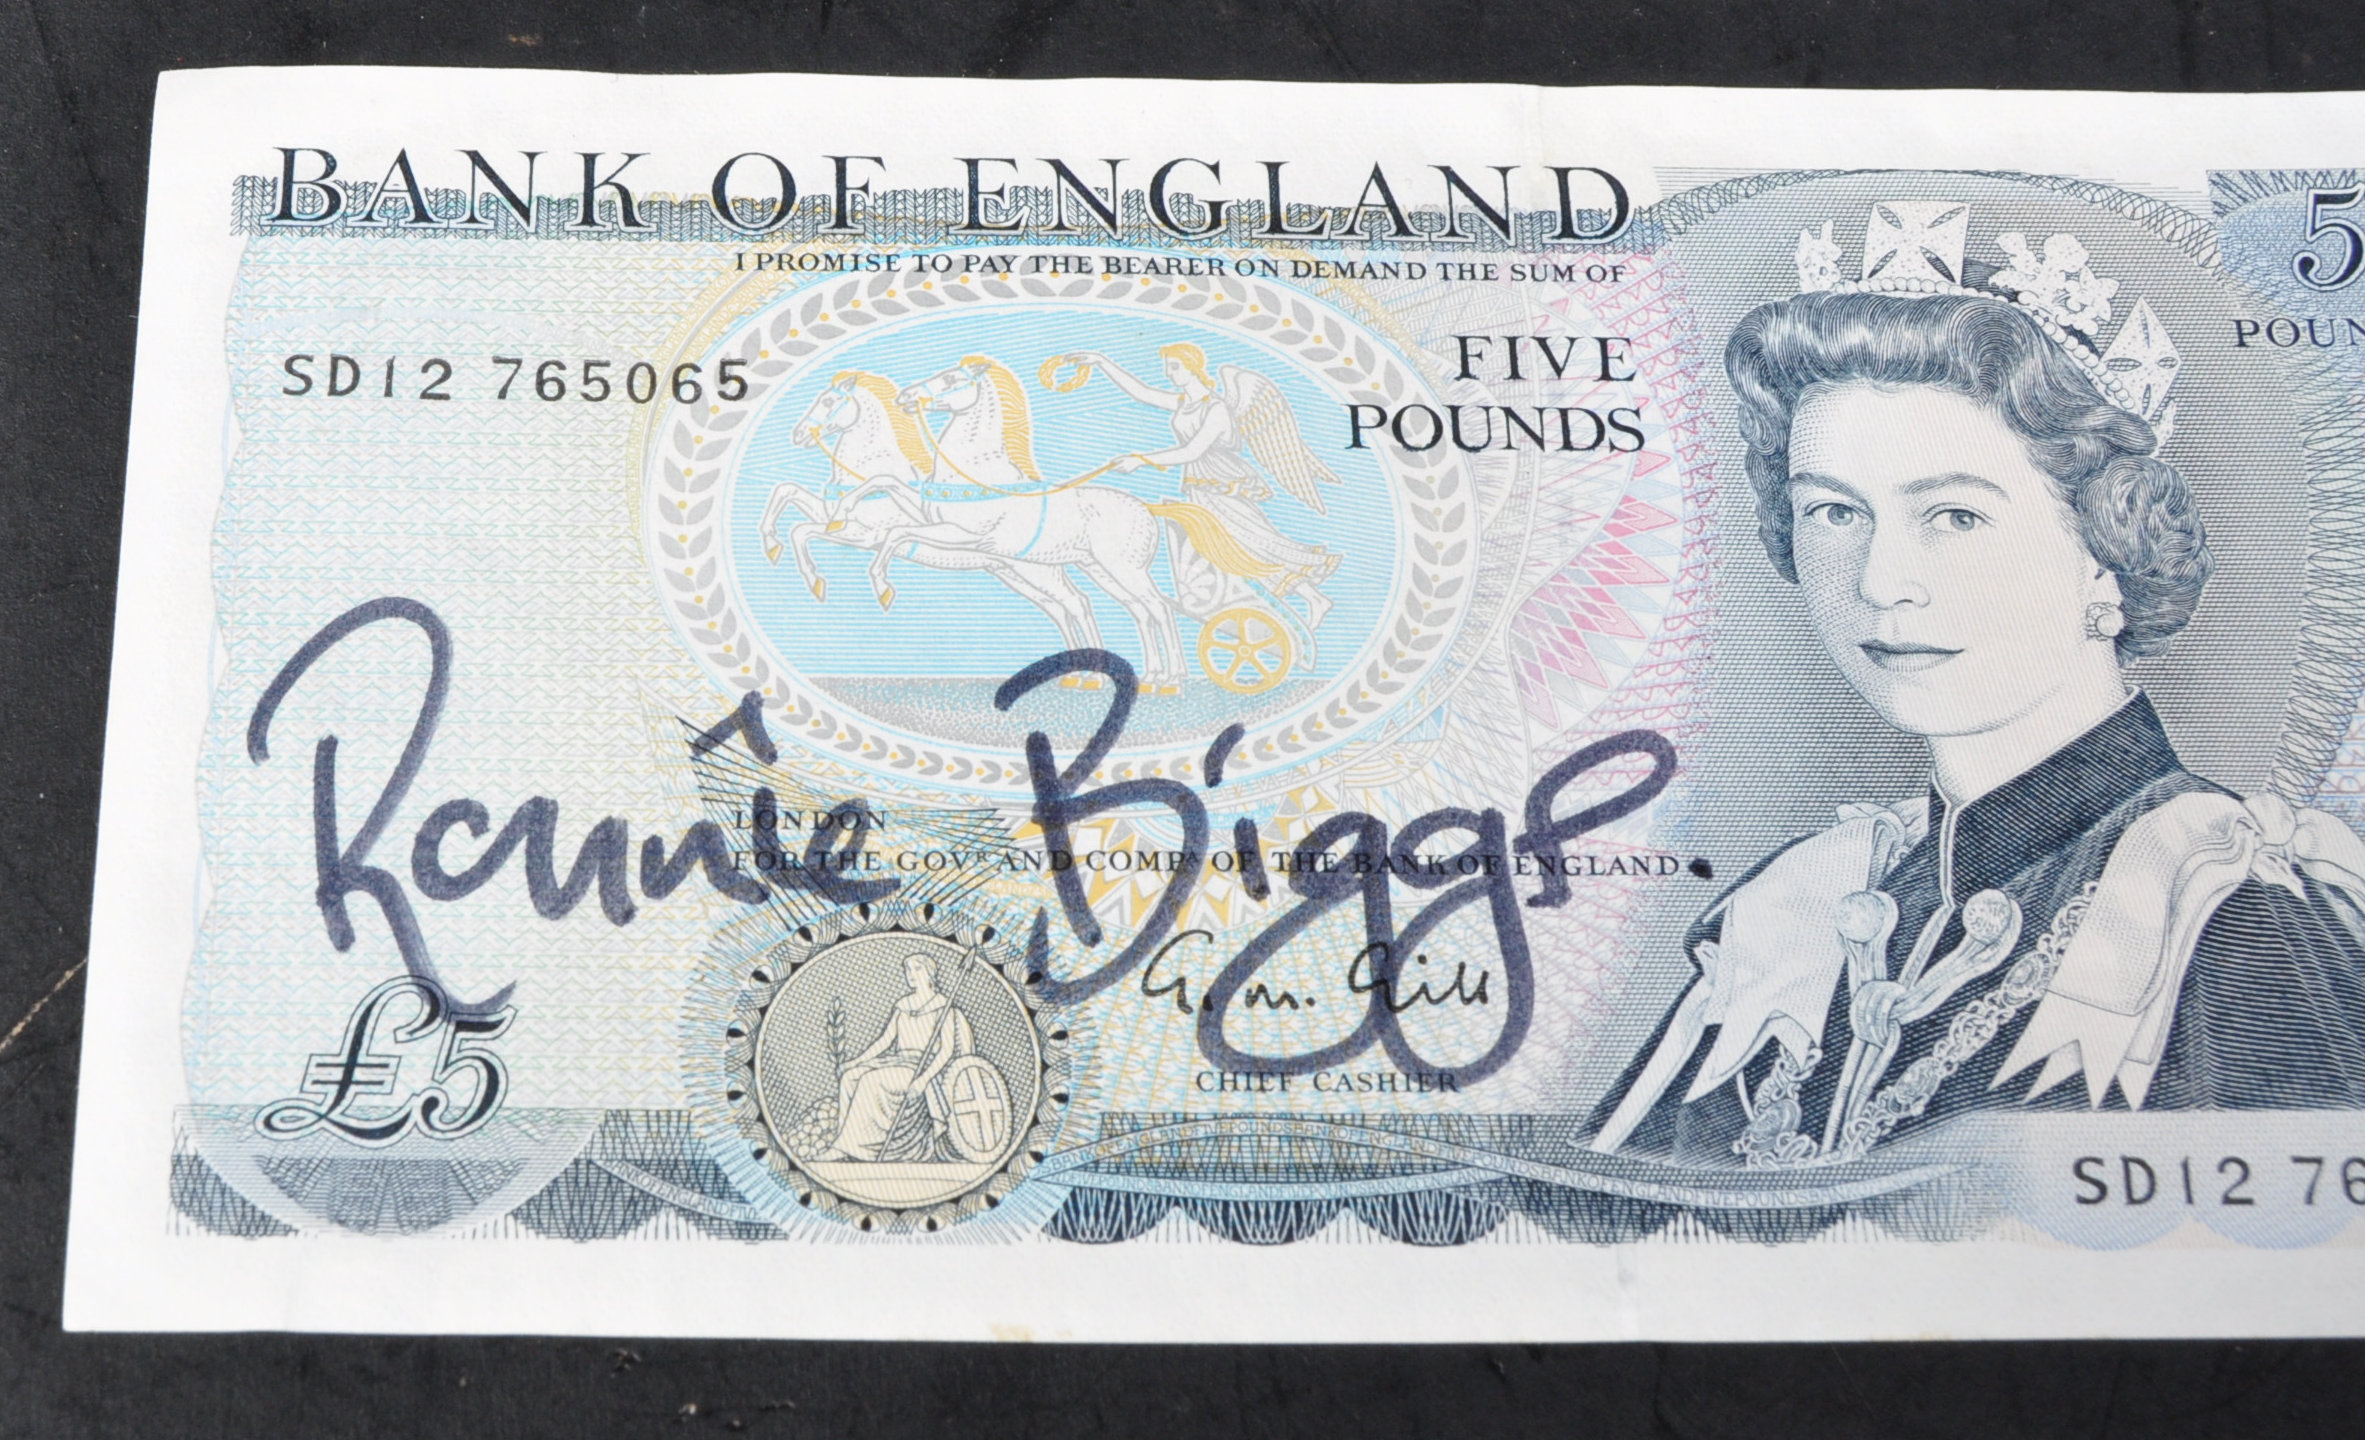 GREAT TRAIN ROBBERY - RONNIE BIGGS SIGNED BANK NOTES - Image 3 of 6